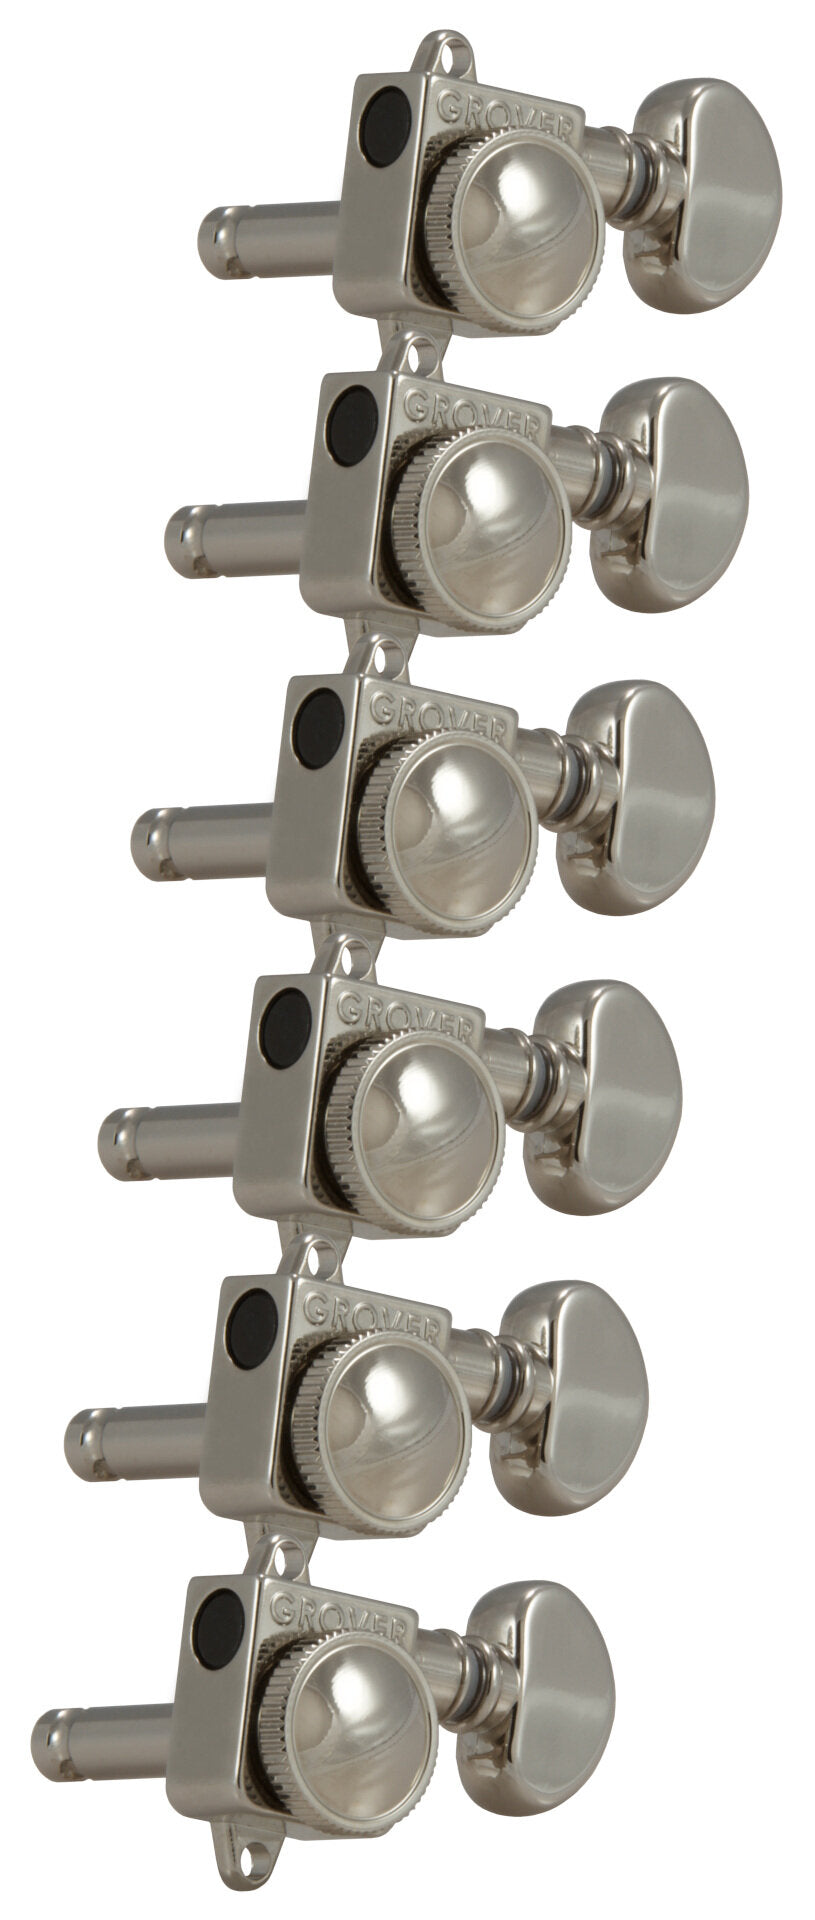 Grover 505FVN Roto-Grip Locking Rotomatics for Vintage F-Style Tuners - Guitar Machine Heads, 6-in-Line, Bass Side (Left) - Nickel